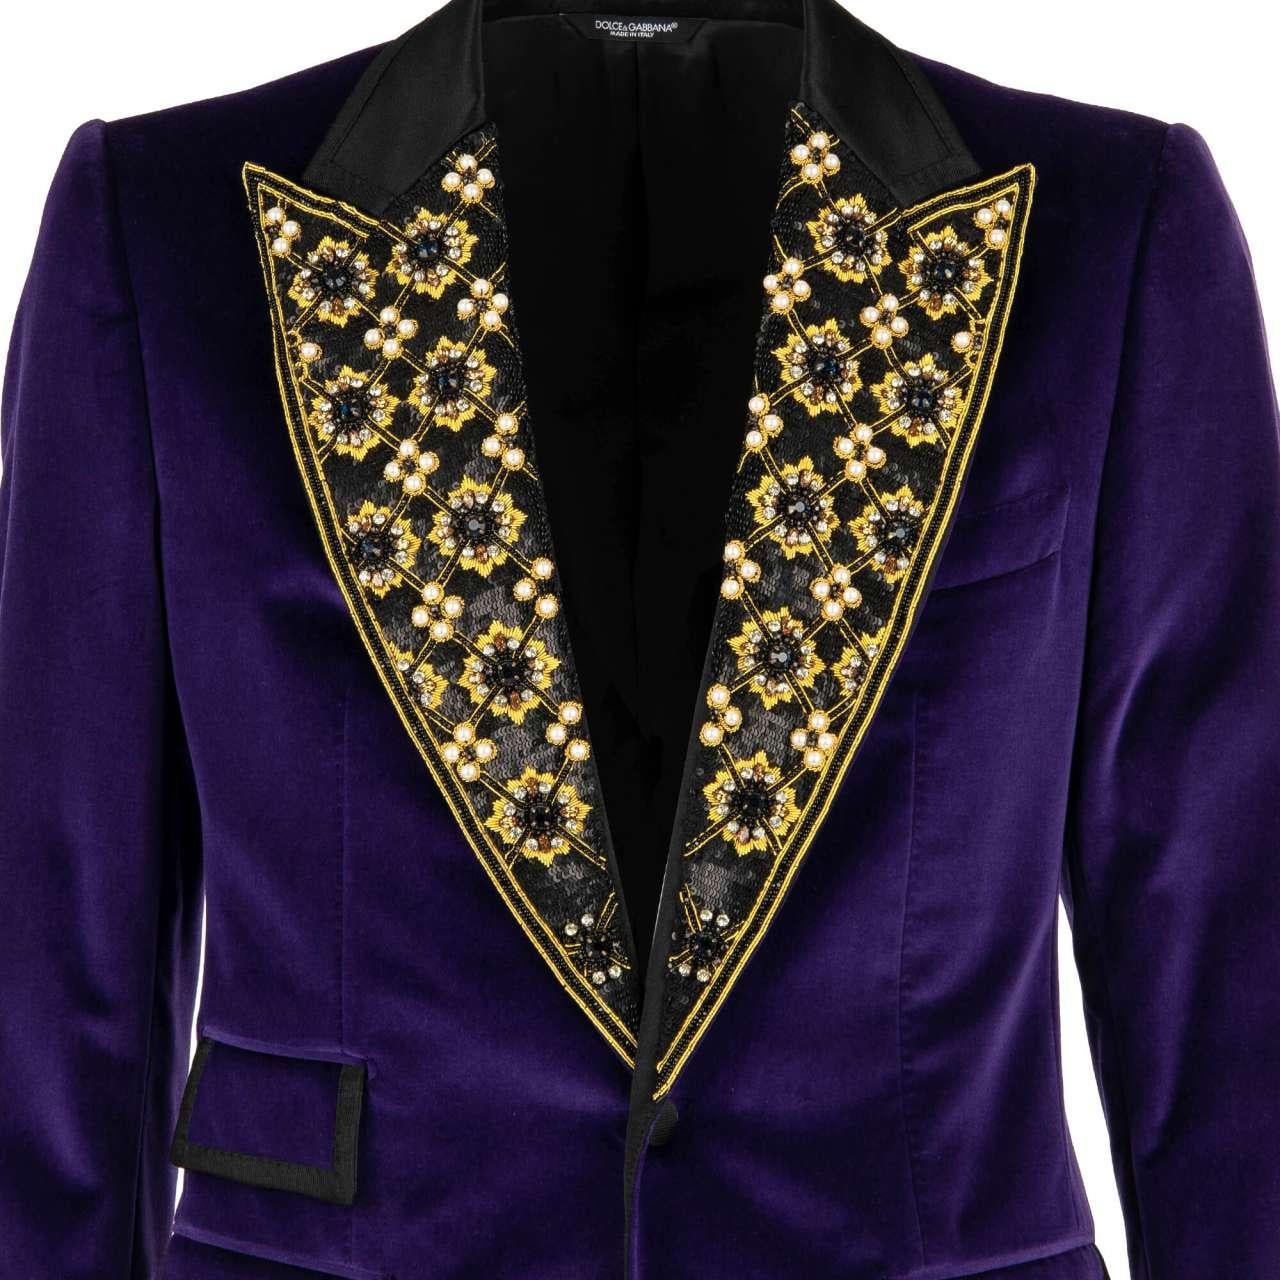 - Stunning Baroque Style velvet tuxedo / blazer with handmade crystals, pearls and sequins embroidery at the lapel and cuffs by DOLCE & GABBANA - Former RRP: EUR 3.950 - MADE IN ITALY - New with Tag - Slim Fit - Model: G2MN0Z FUVCF-F0517 - Material: